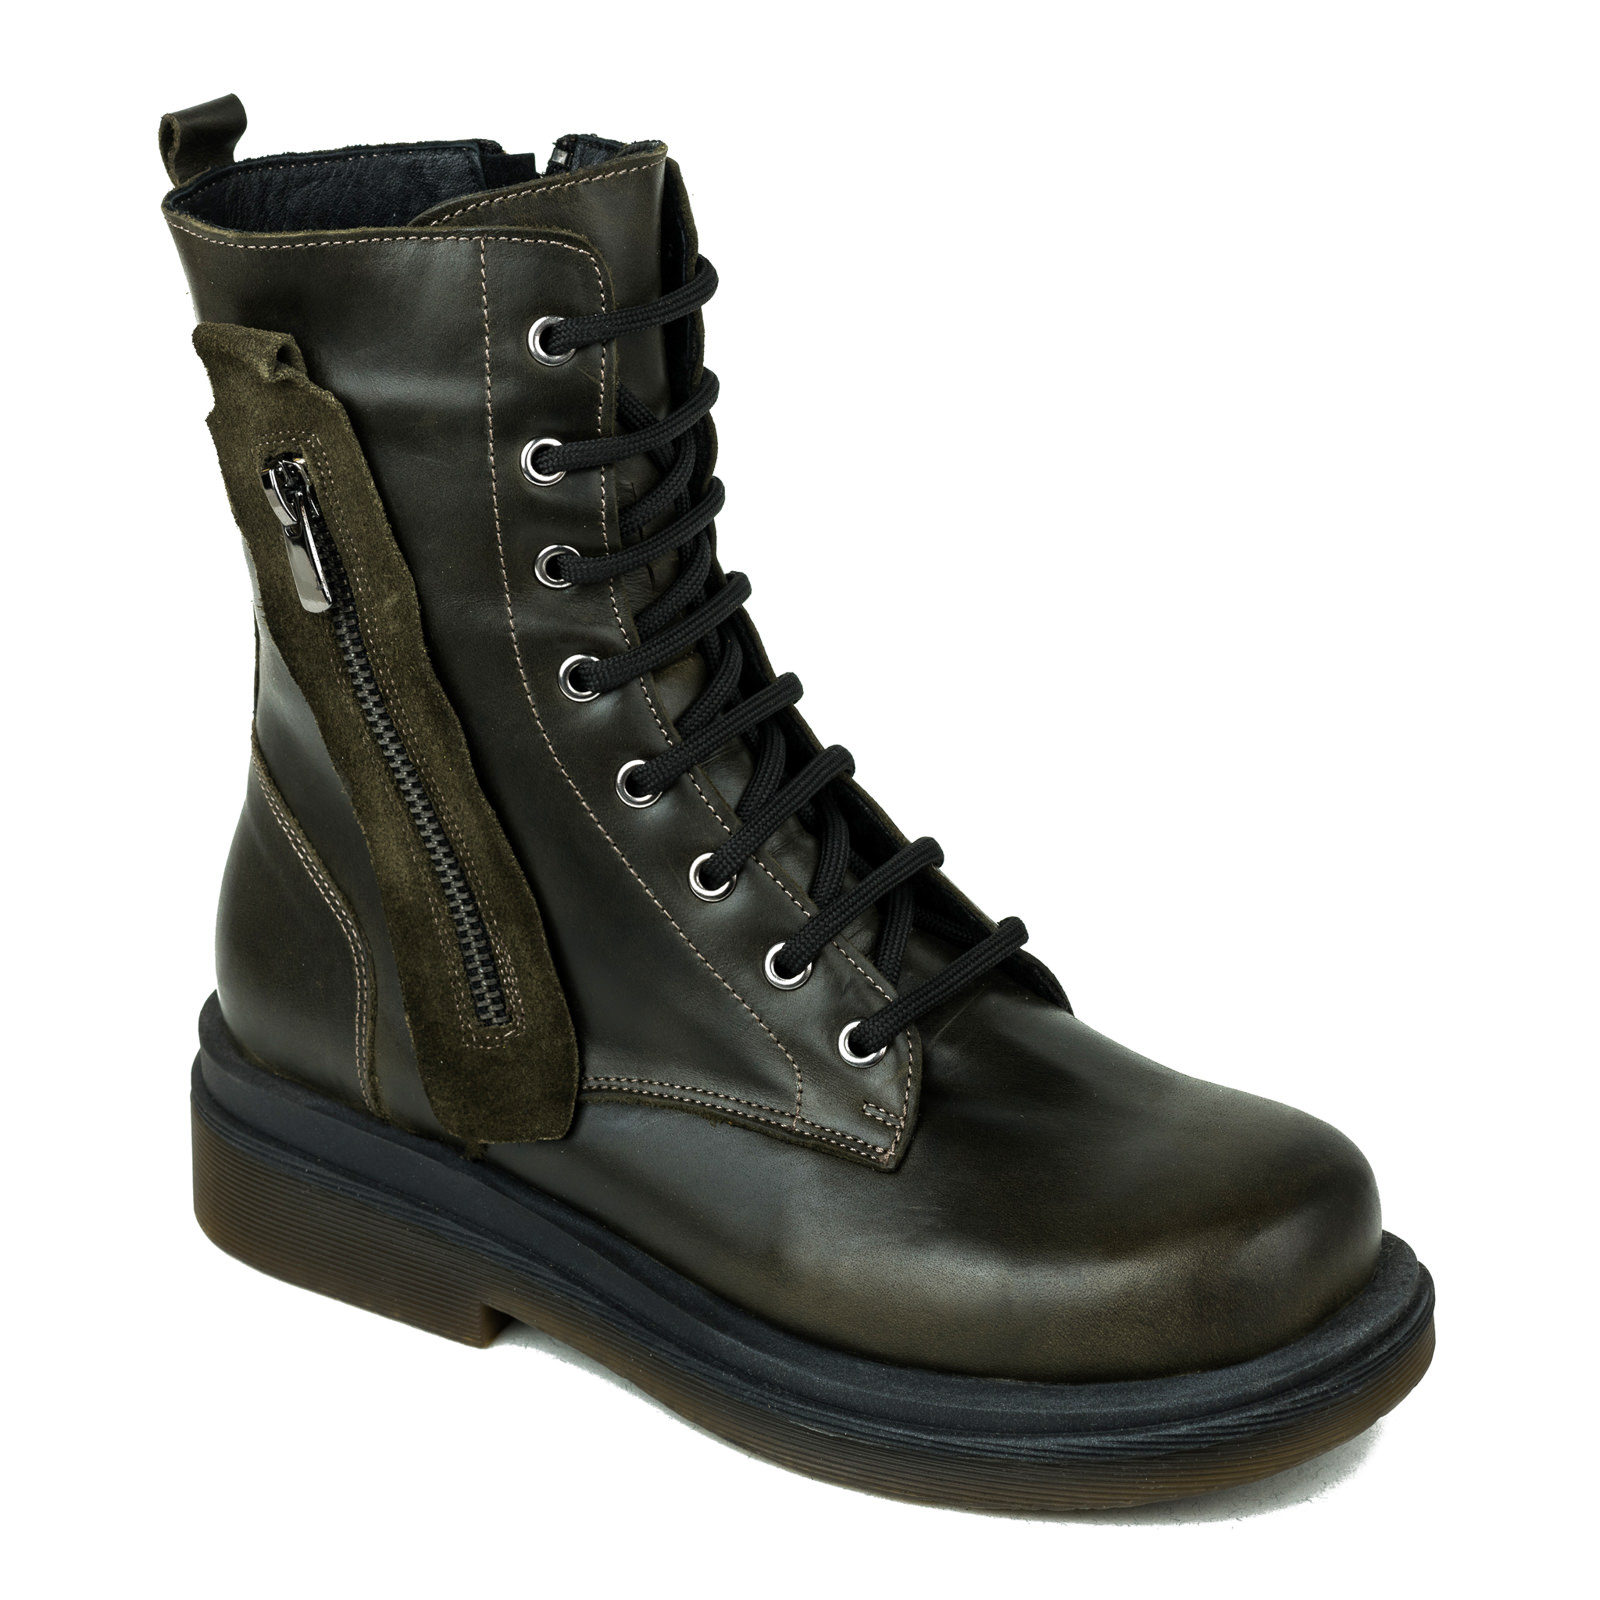 Leather ankle boots B058 - DARK GREEN